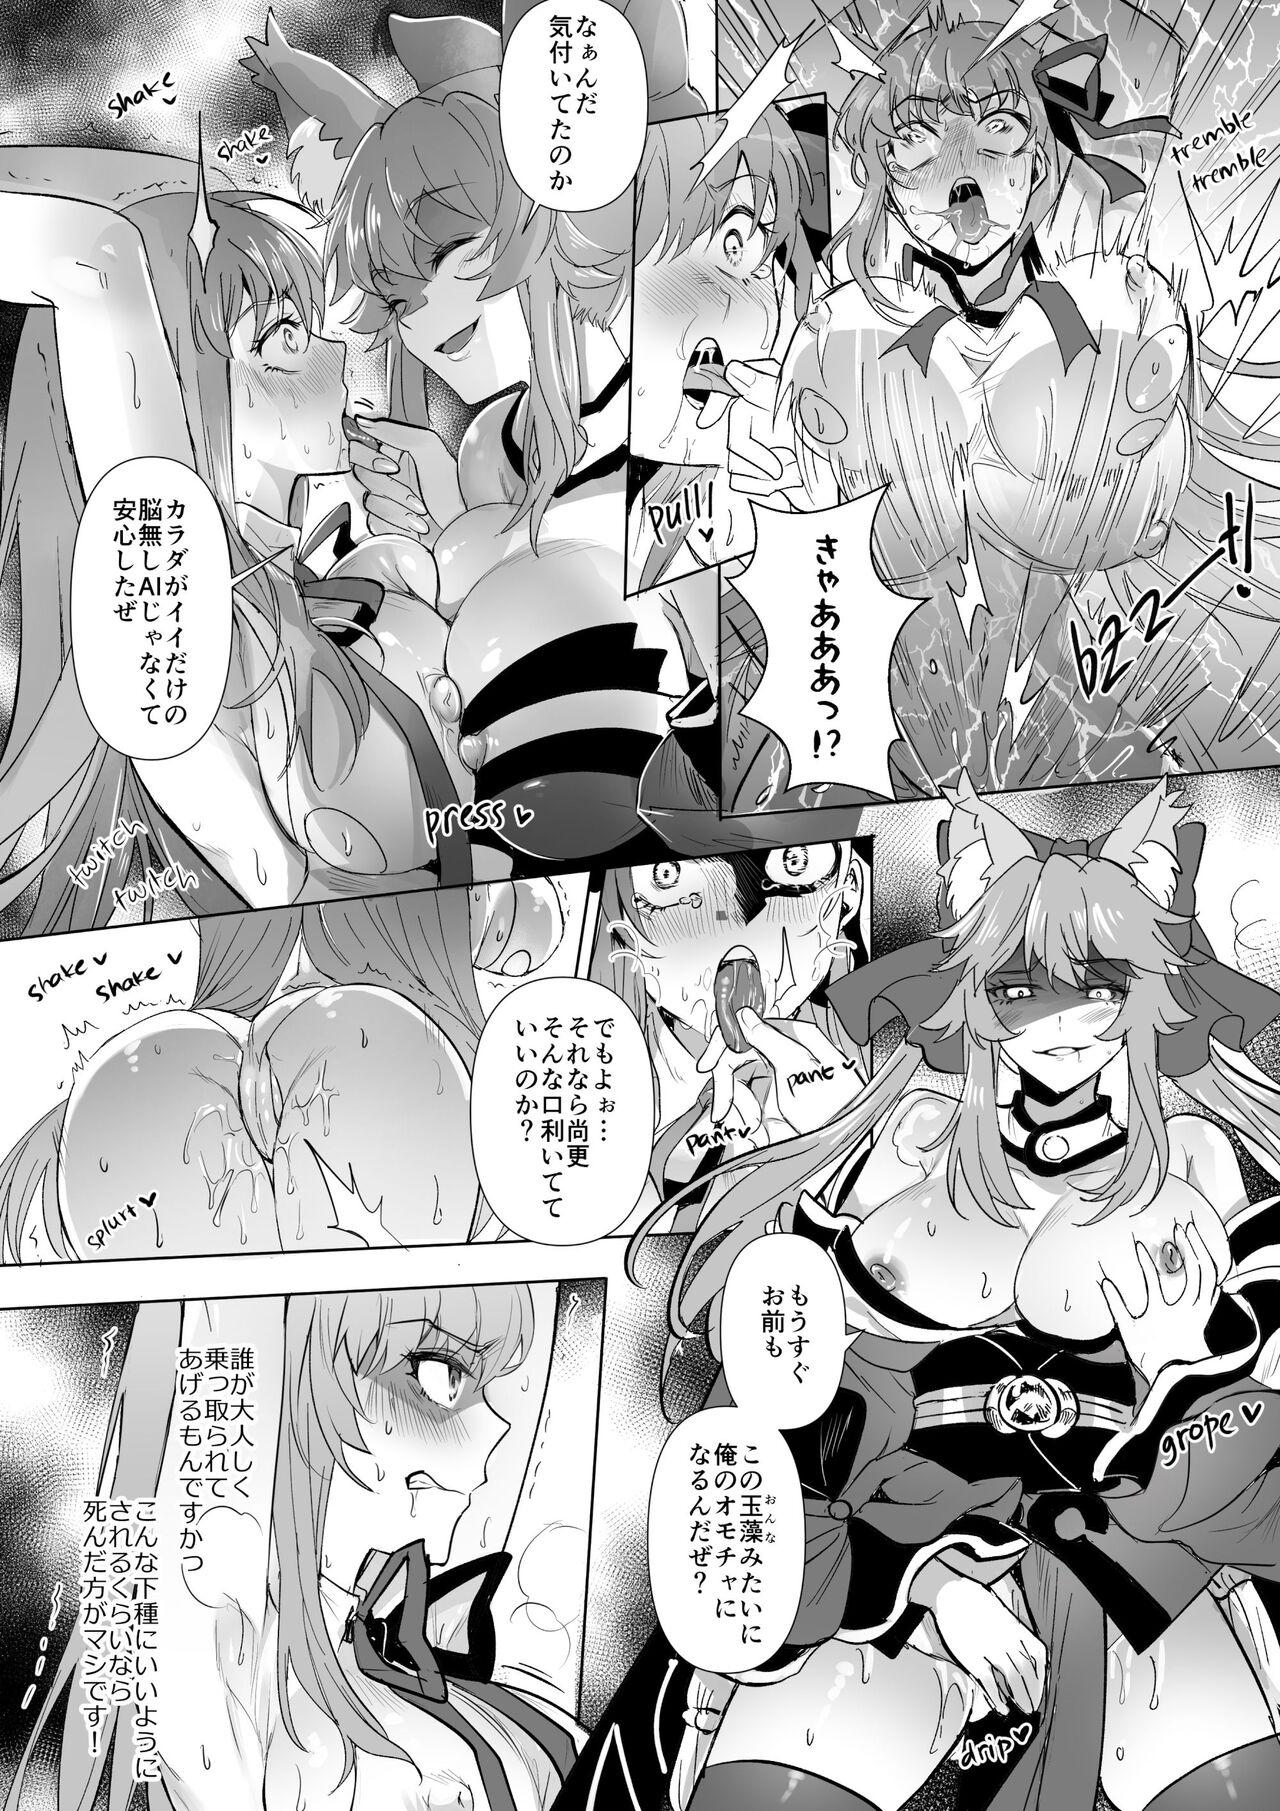 Mommy FGO BB&ランサーアルトリア憑依 - Fate grand order Russia - Page 3